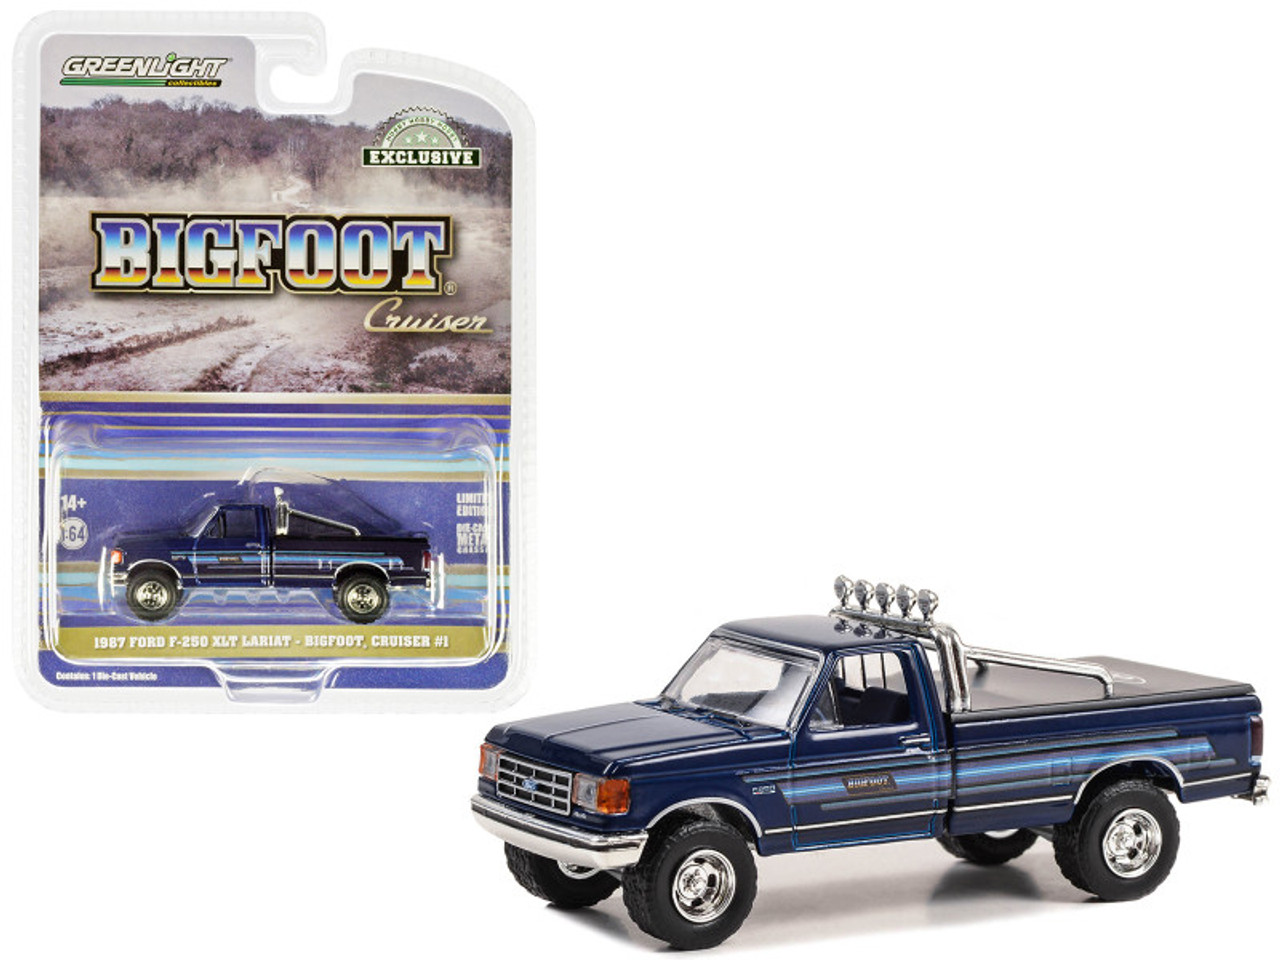 1987 Ford F-250 XLT Lariat Pickup Truck Blue with Stripes and Blue Interior "Bigfoot Cruiser #1" "Hobby Exclusive" Series 1/64 Diecast Model Car by Greenlight